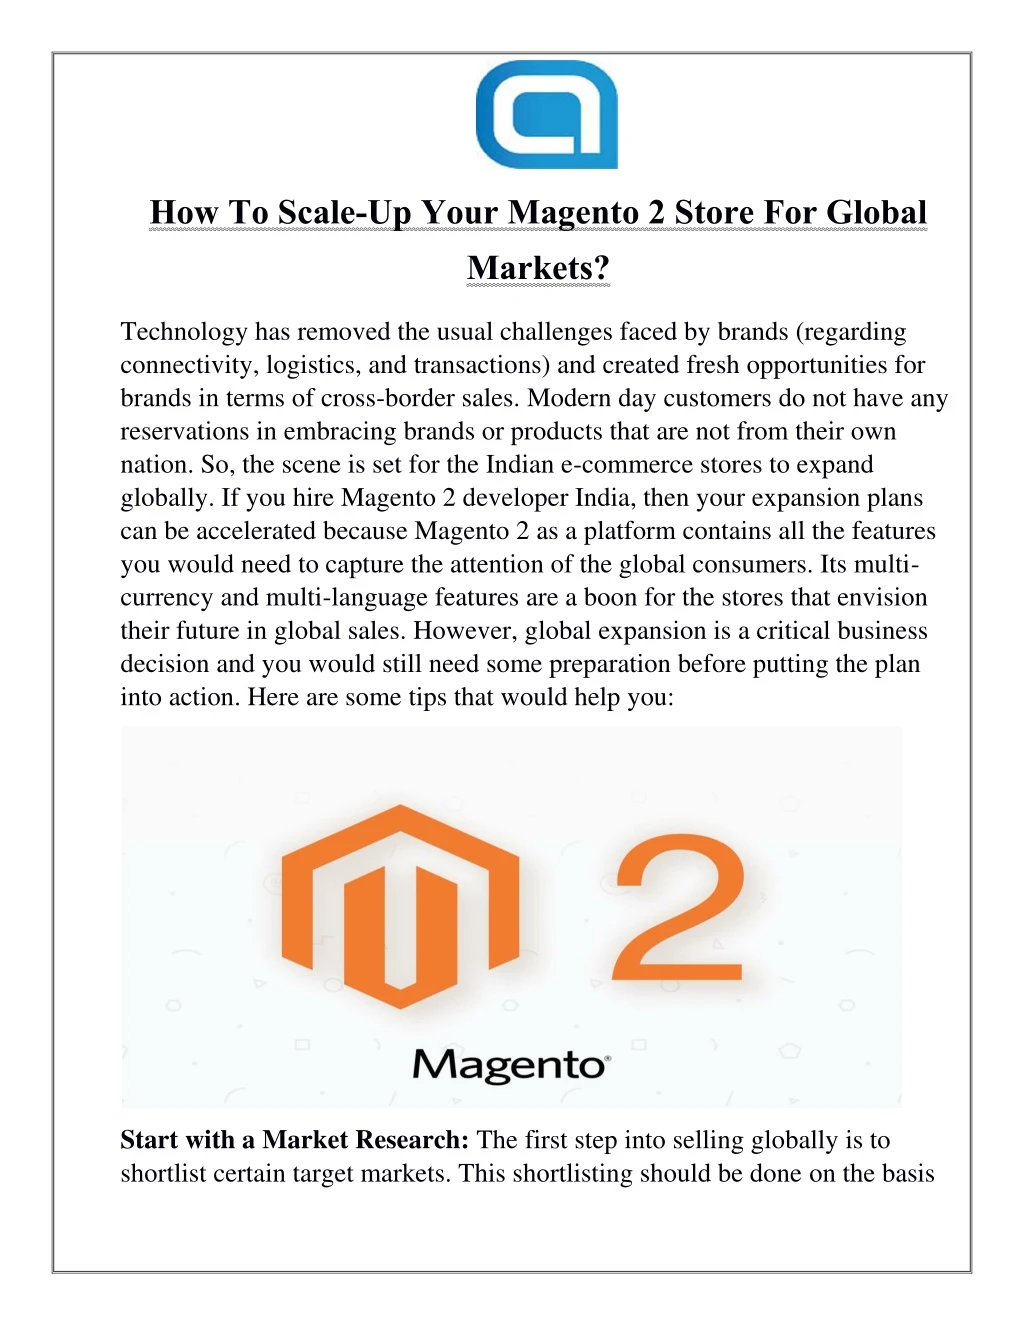 how to scale up your magento 2 store for global